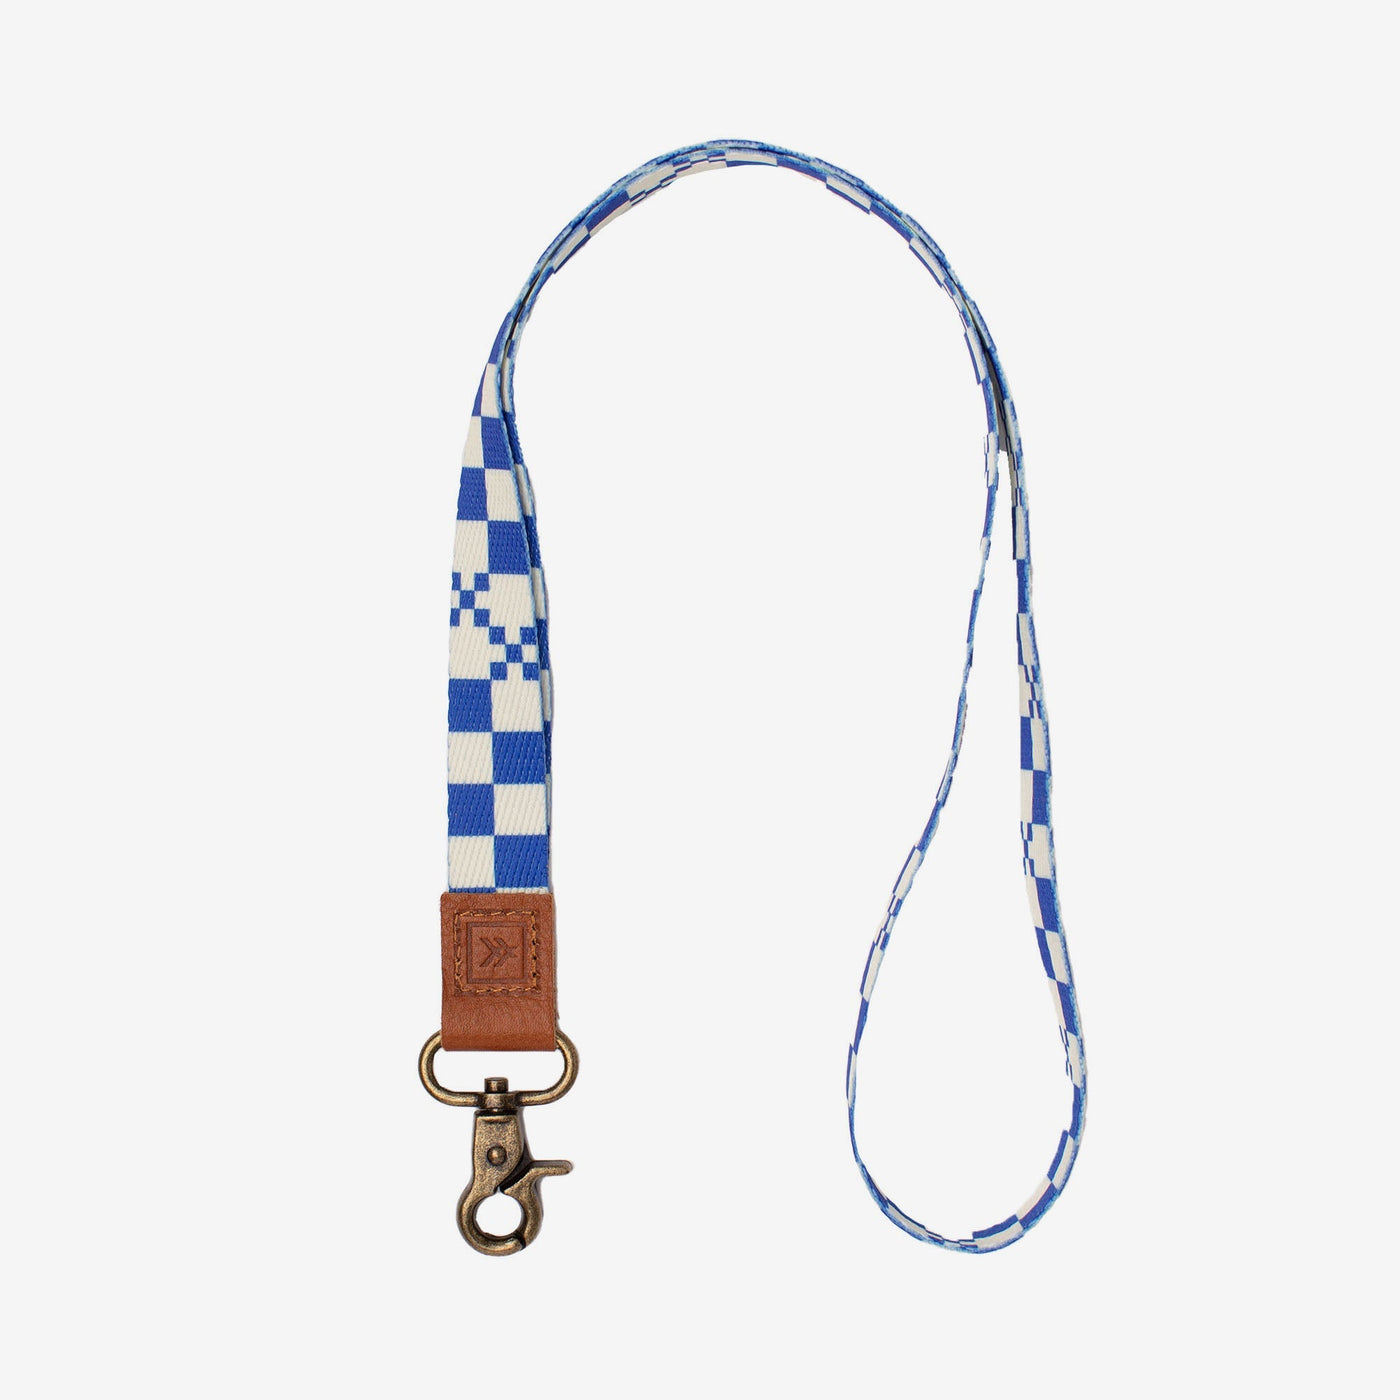 Blue and white checkered neck lanyard